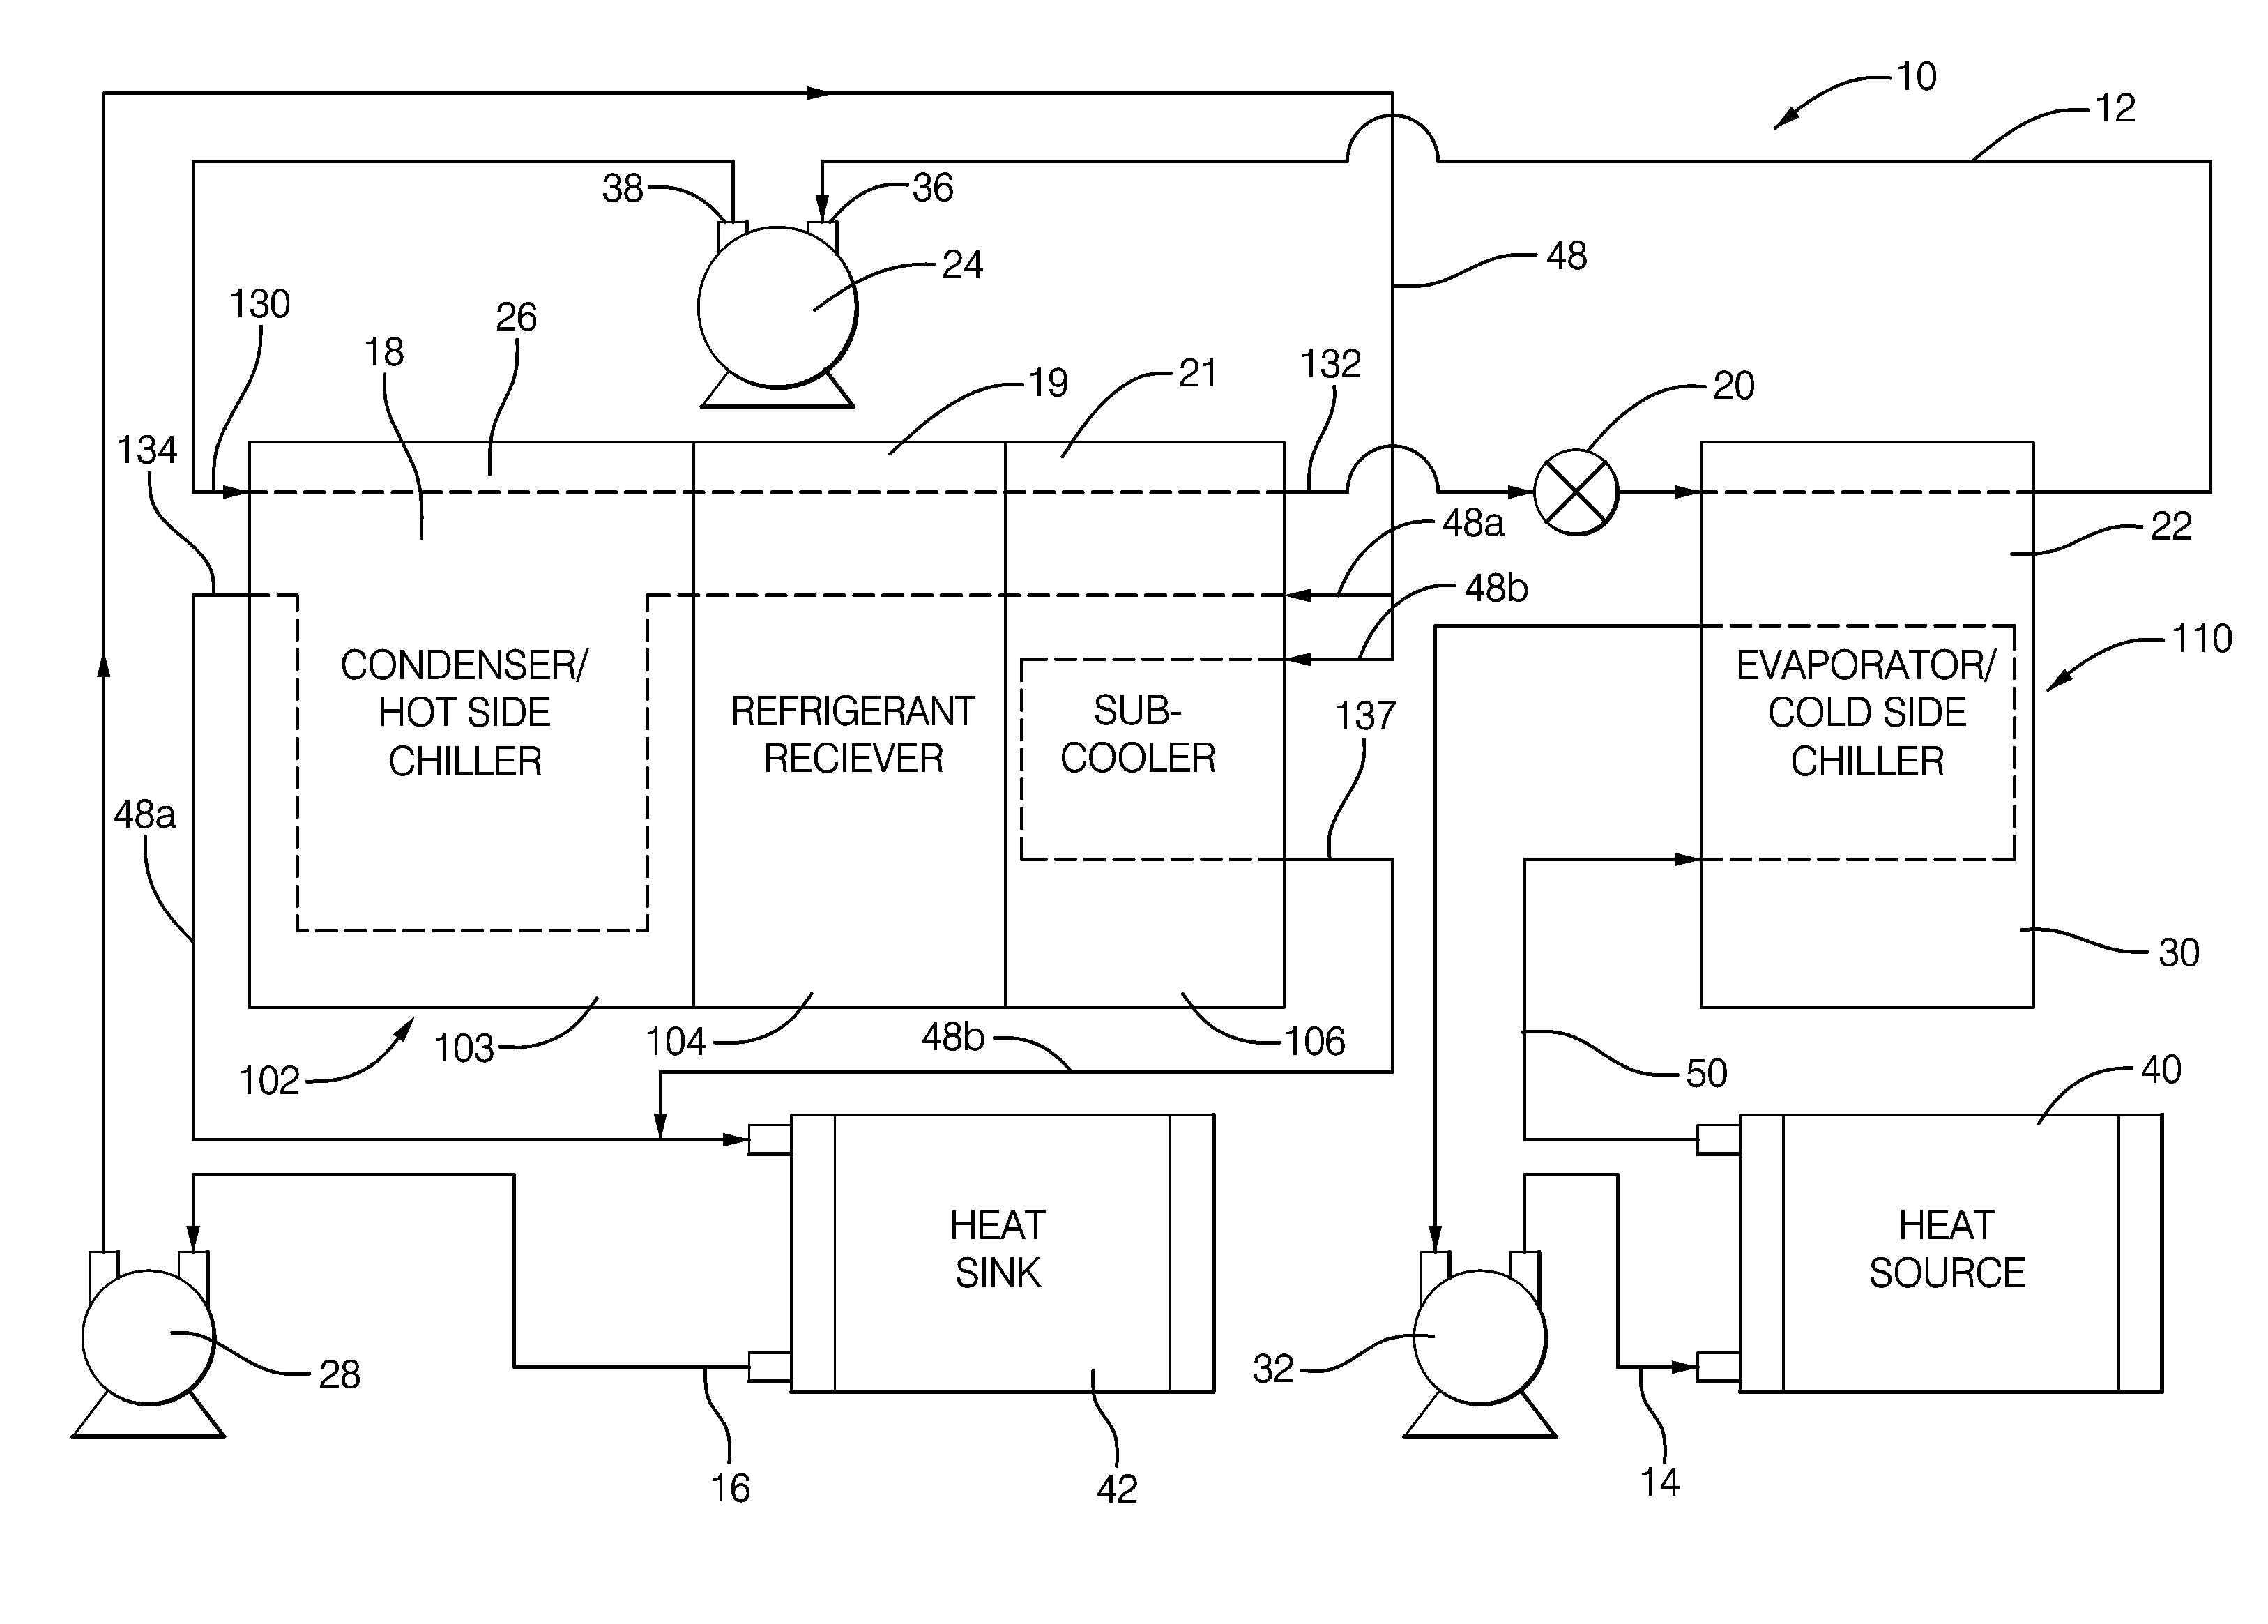 Unitary heat pump air conditioner having a heat exchanger with an integral receiver and sub-cooler